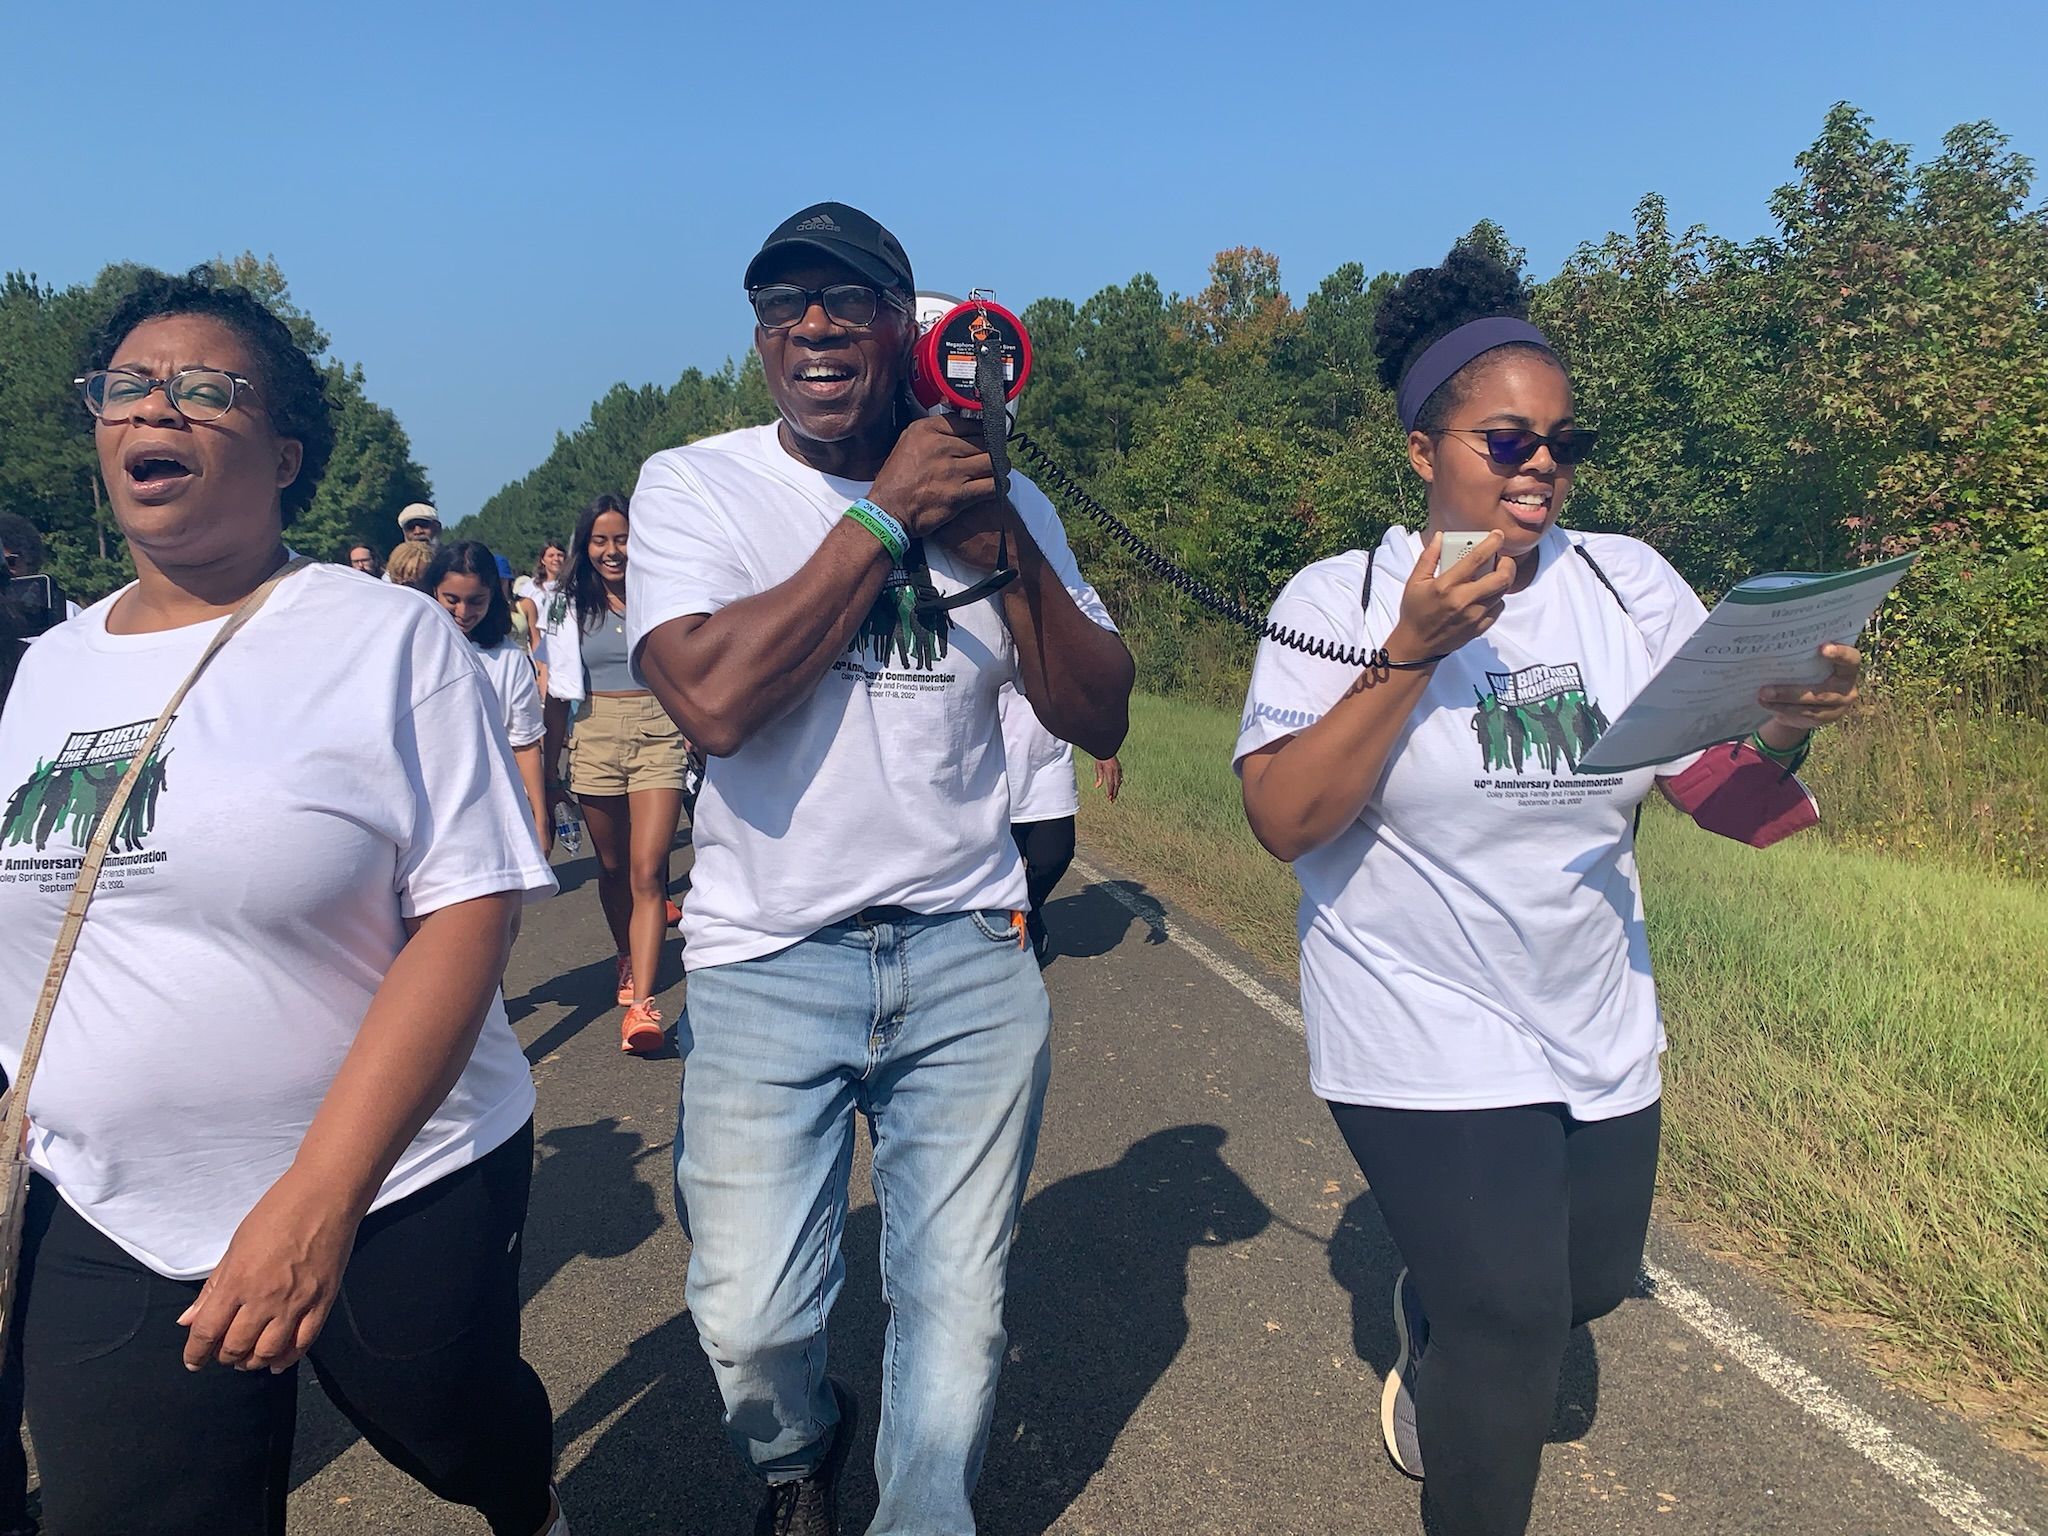 Cameron marching alongside fellow Warren County Environmental Action Team members and her oral history students during the Environmental Justice Movement 40th anniversary commemoration in Afton, NC. 